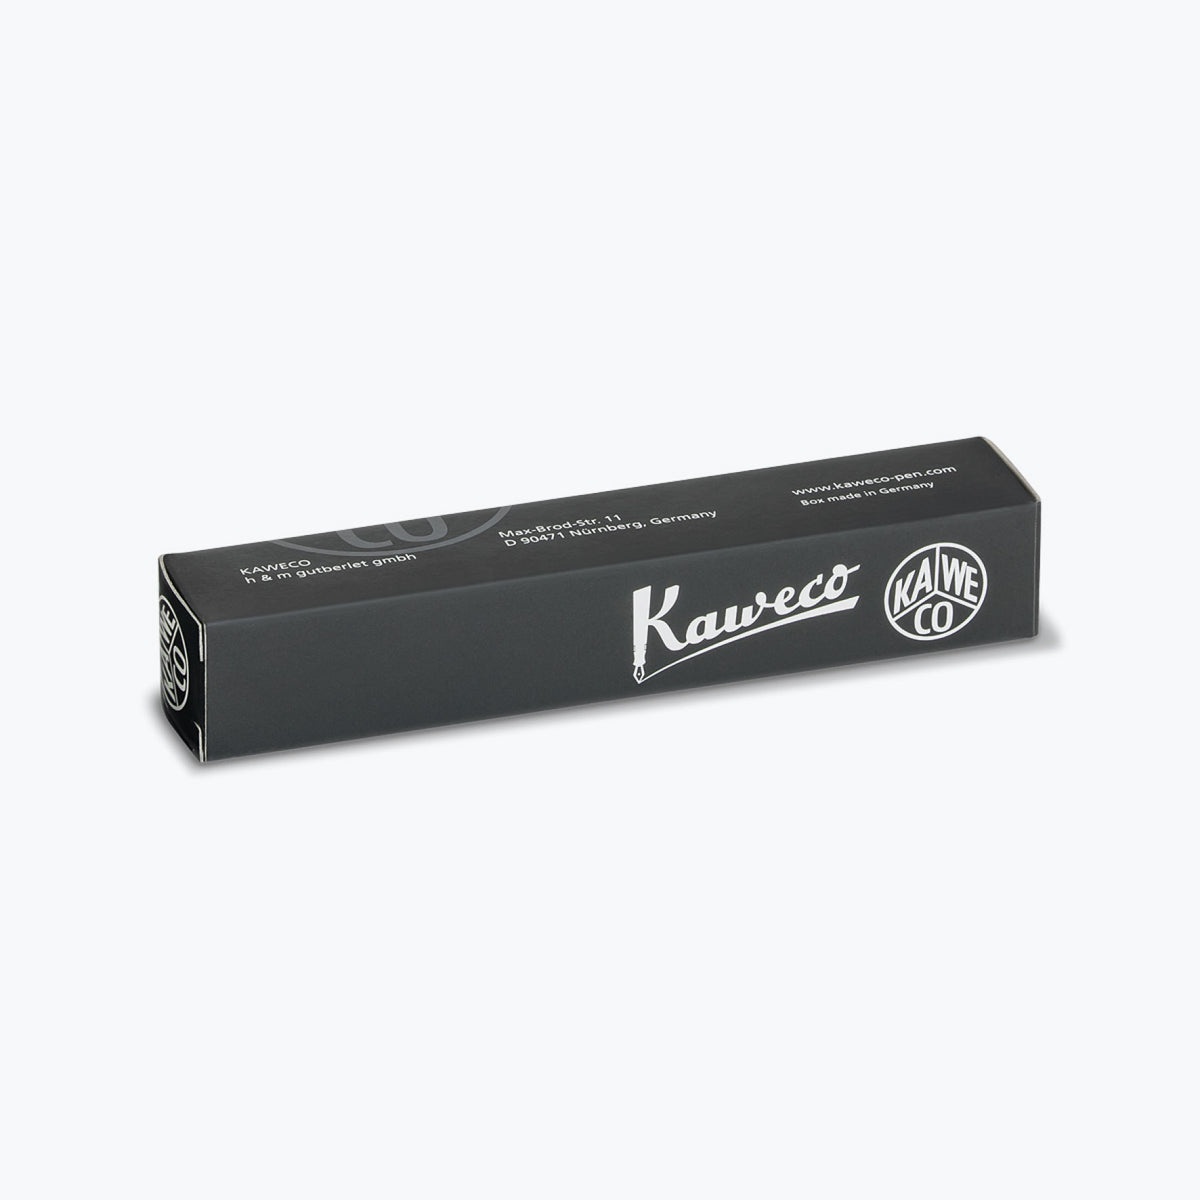 Kaweco - Rollerball Pen - Classic Sport - Red <Outgoing>